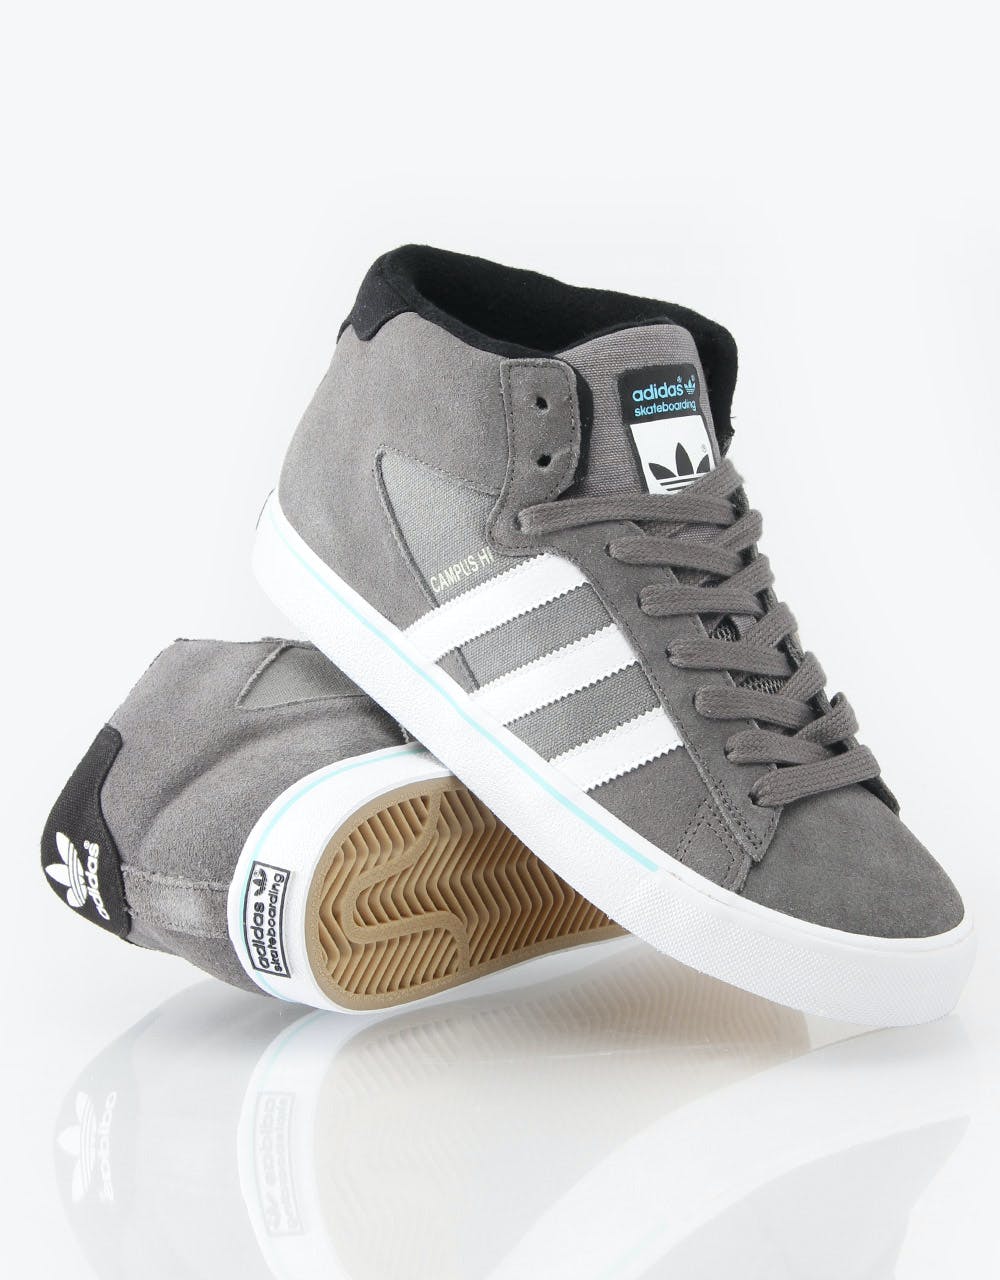 adidas Campus Vulc Mid Skate Shoes - Cinder/White/Black – Route One